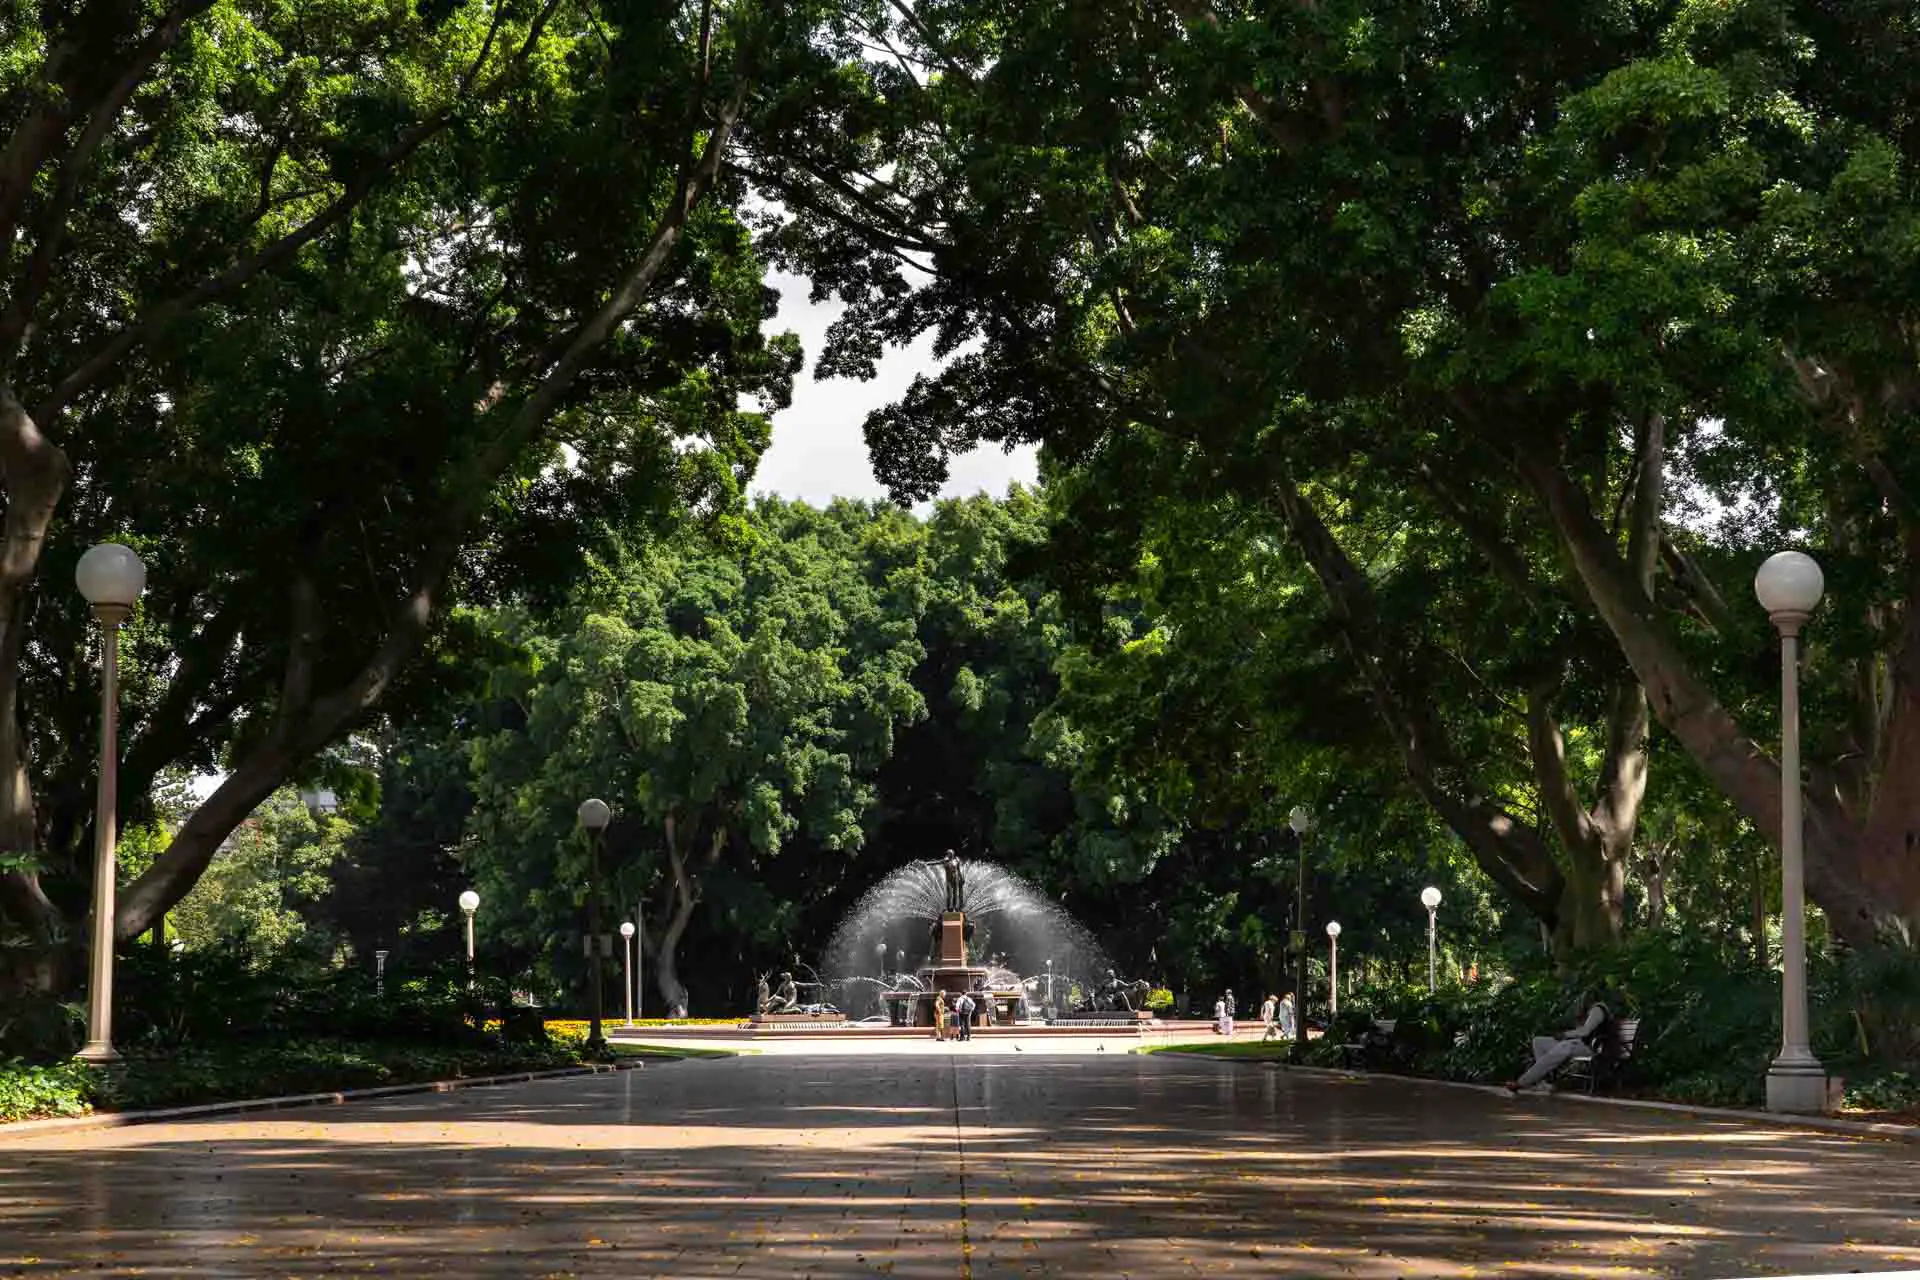 Archibald Memorial Fountain viewed down a walkway shaded by a canopy of trees in Hyde Park, Sydney